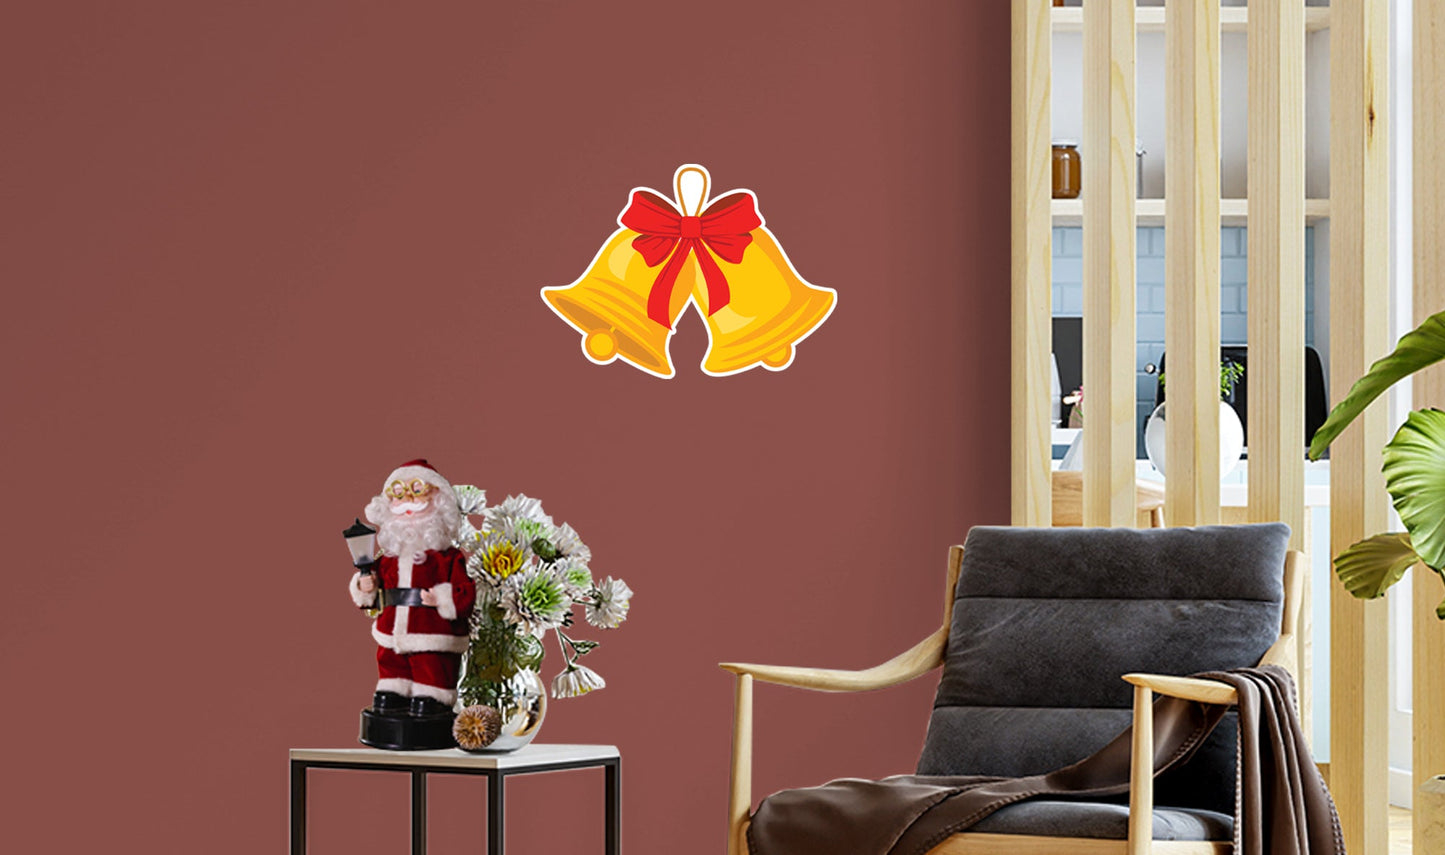 Christmas: Bells Icon - Removable Adhesive Decal